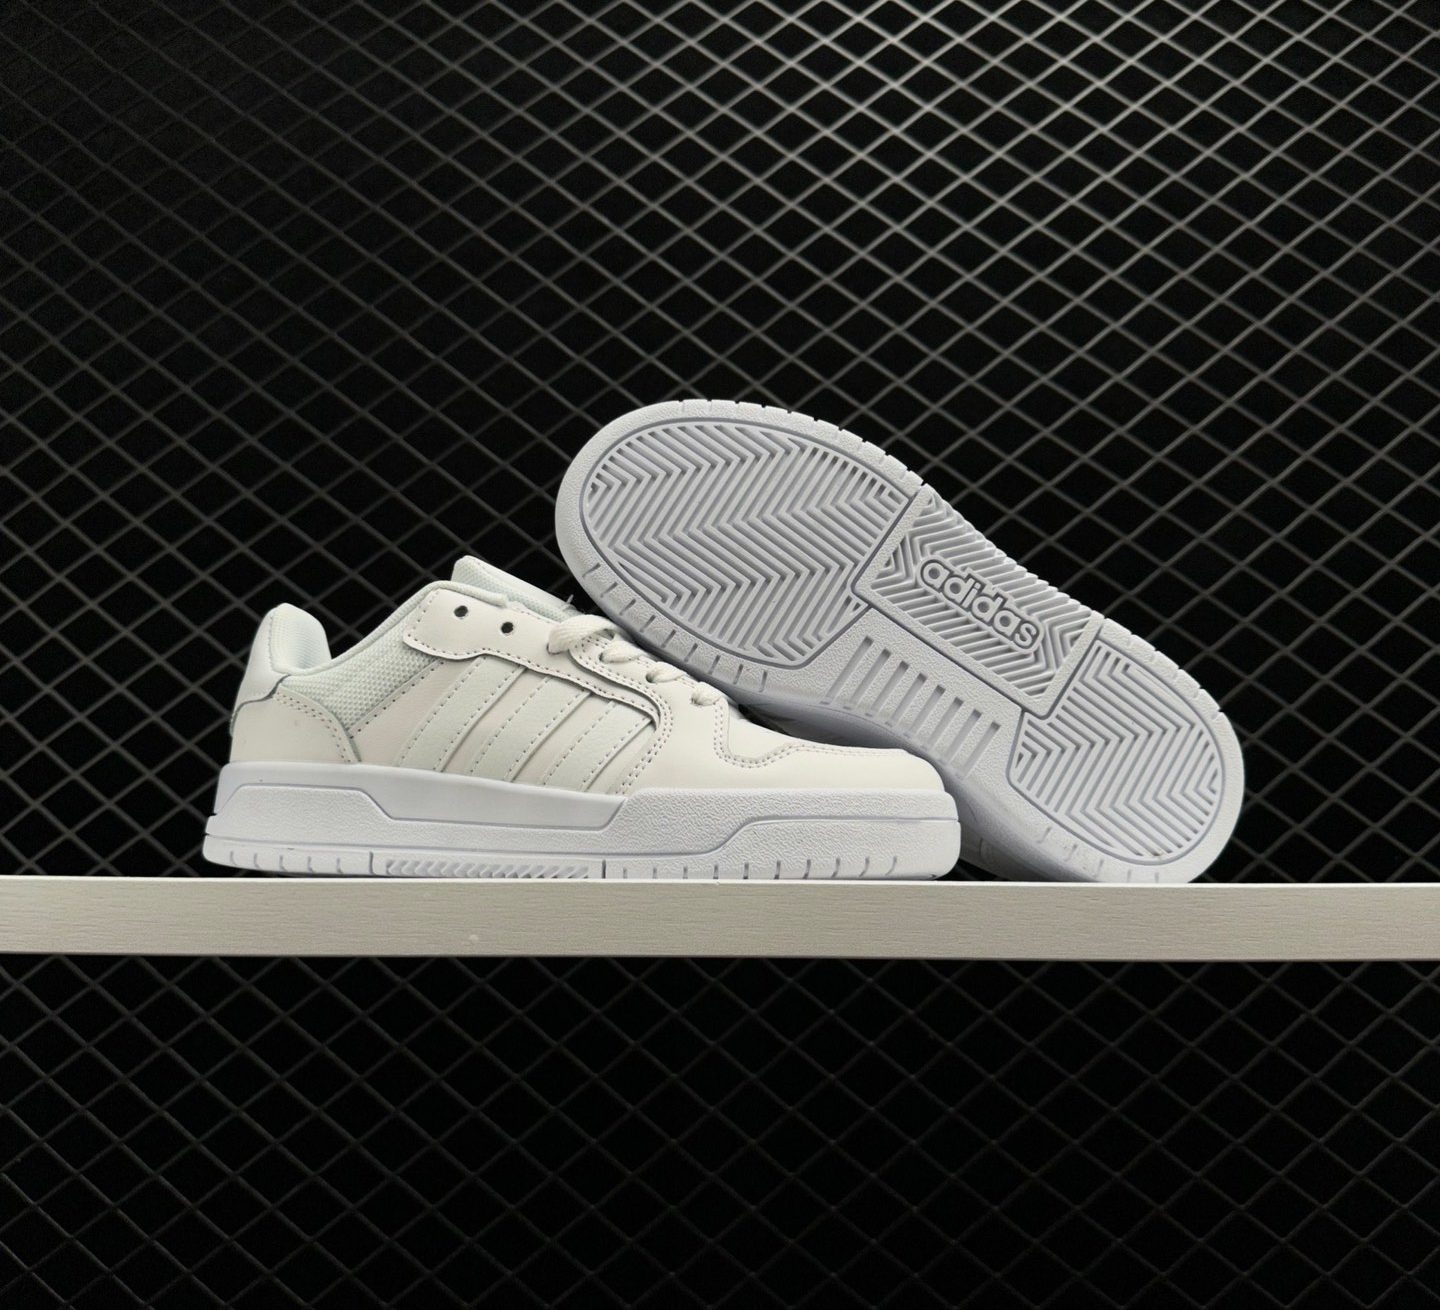 Adidas Neo Entrap White - Trendy Shoes for Every Occasion